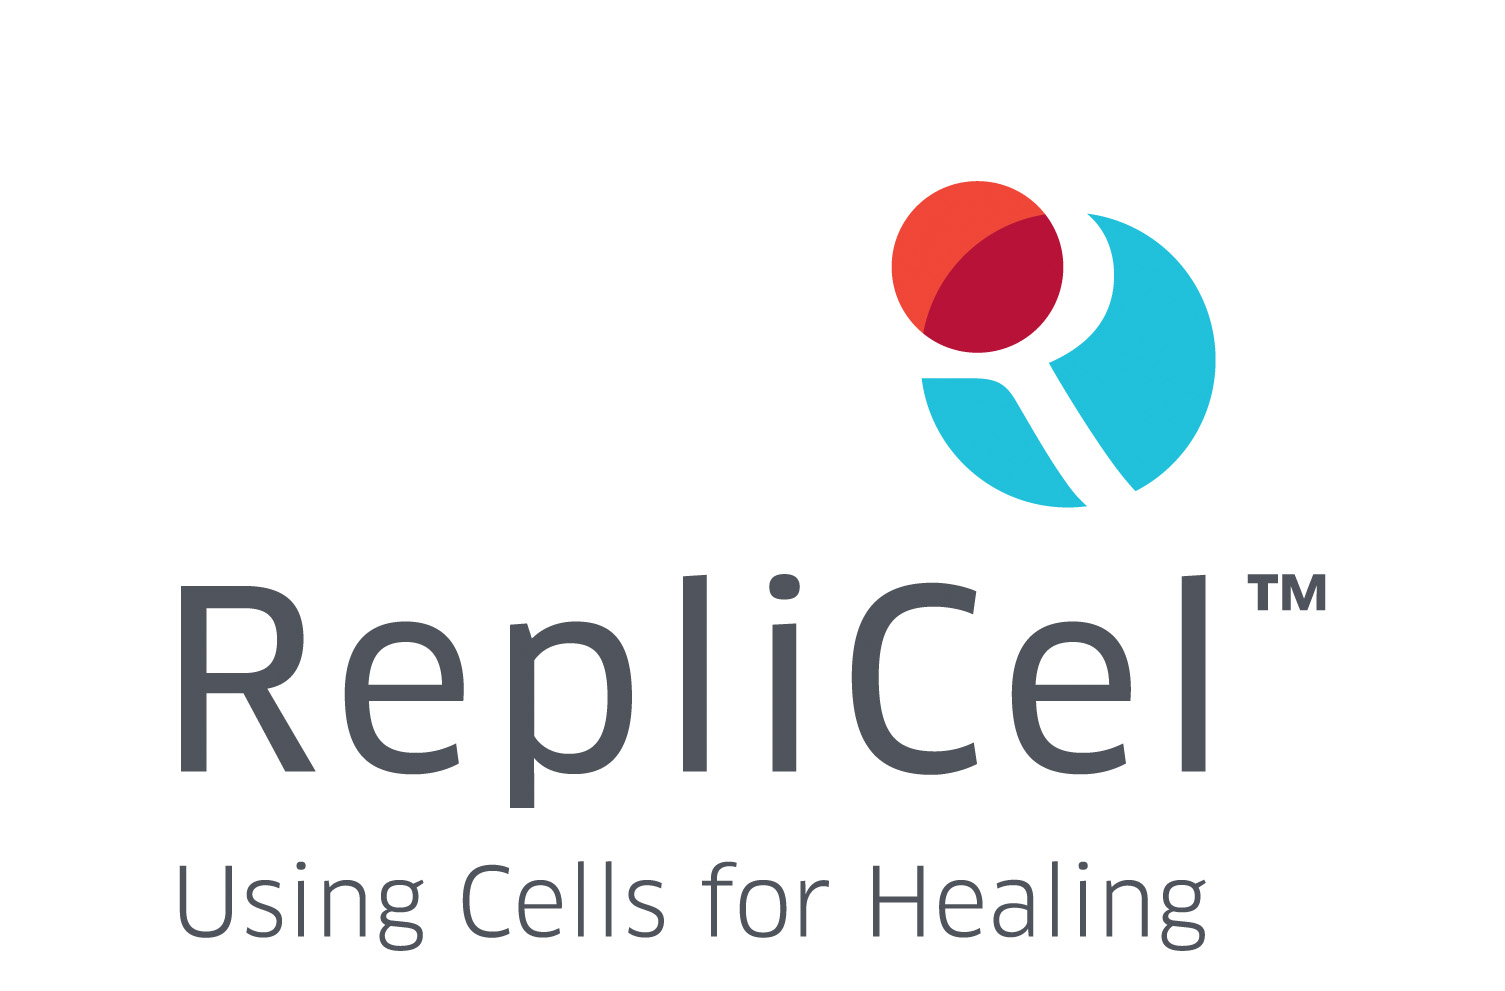 RepliCel Life Sciences, Inc., Tuesday, May 25, 2021, Press release picture